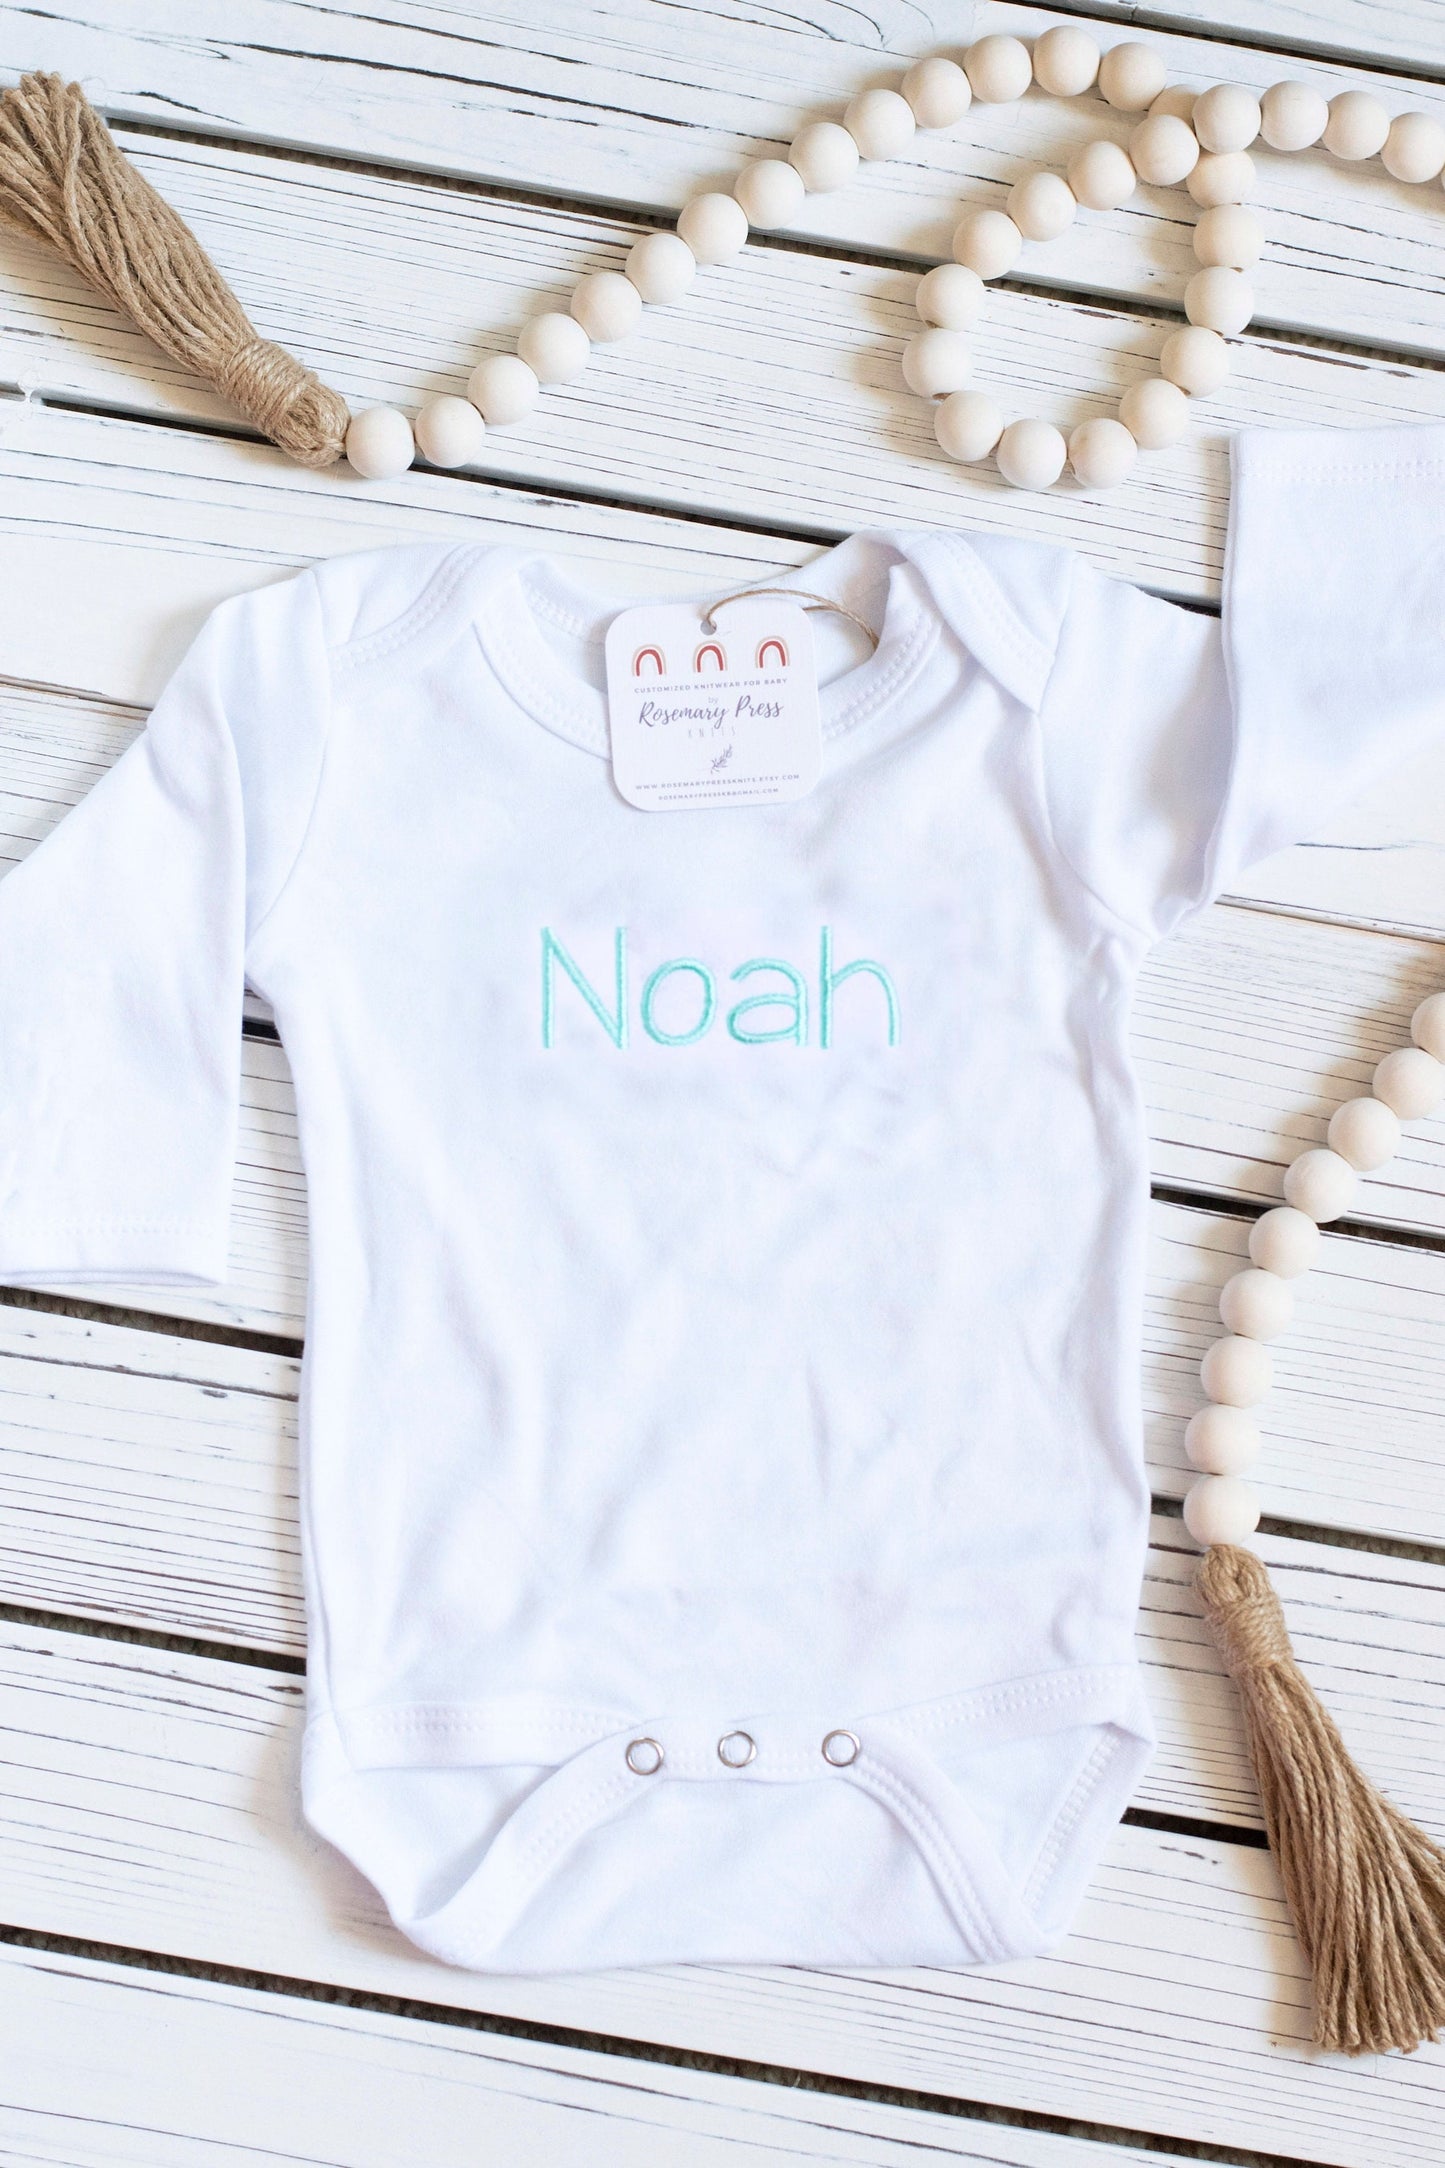 Personalized Baby Bodysuit | Custom Embroidered Baby Bodysuit Long-Sleeve | 0-to-3 Months